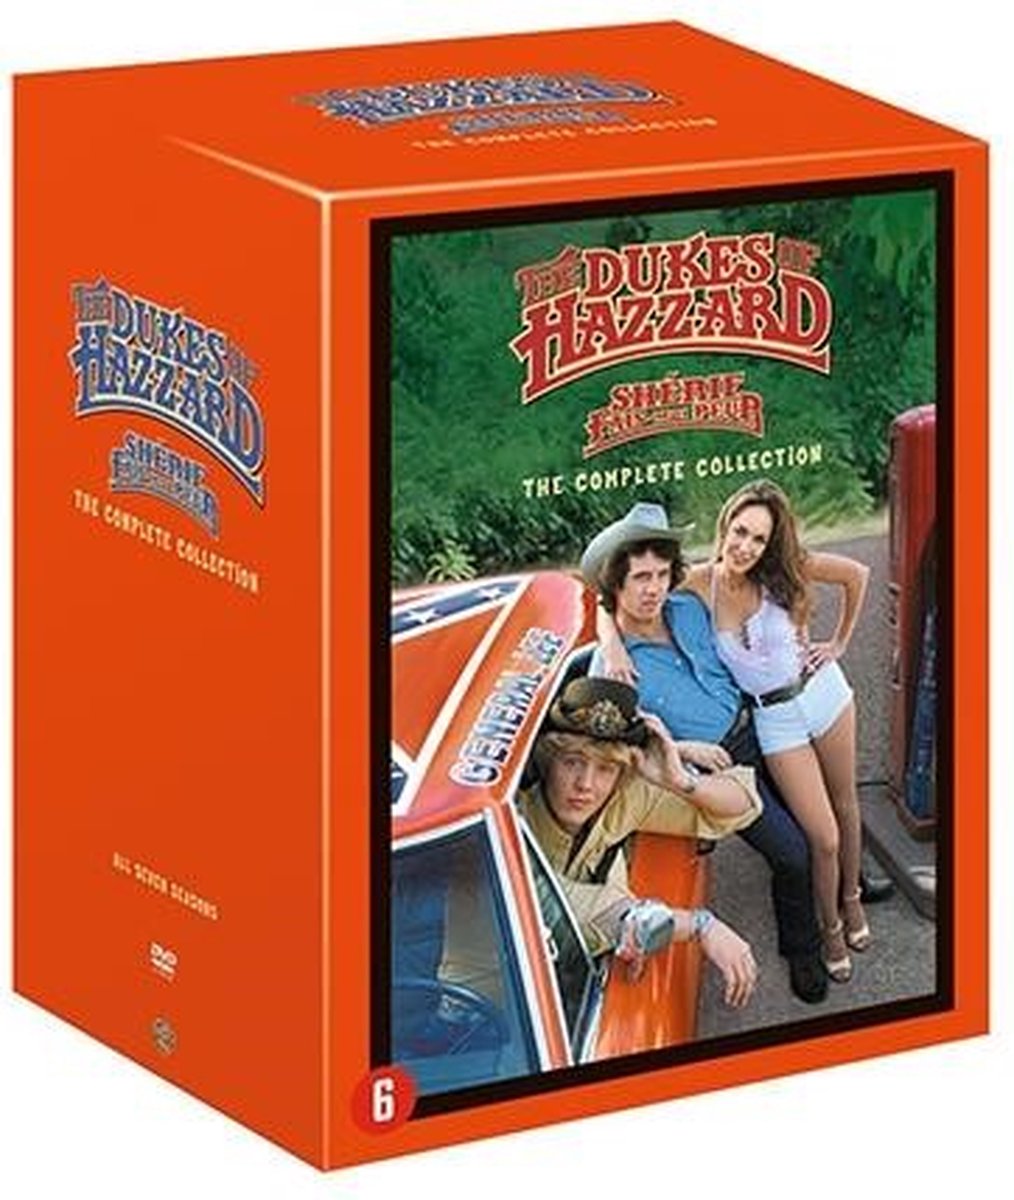 Dukes Of Hazzard - Complete Collection (DVD) - Tv Series